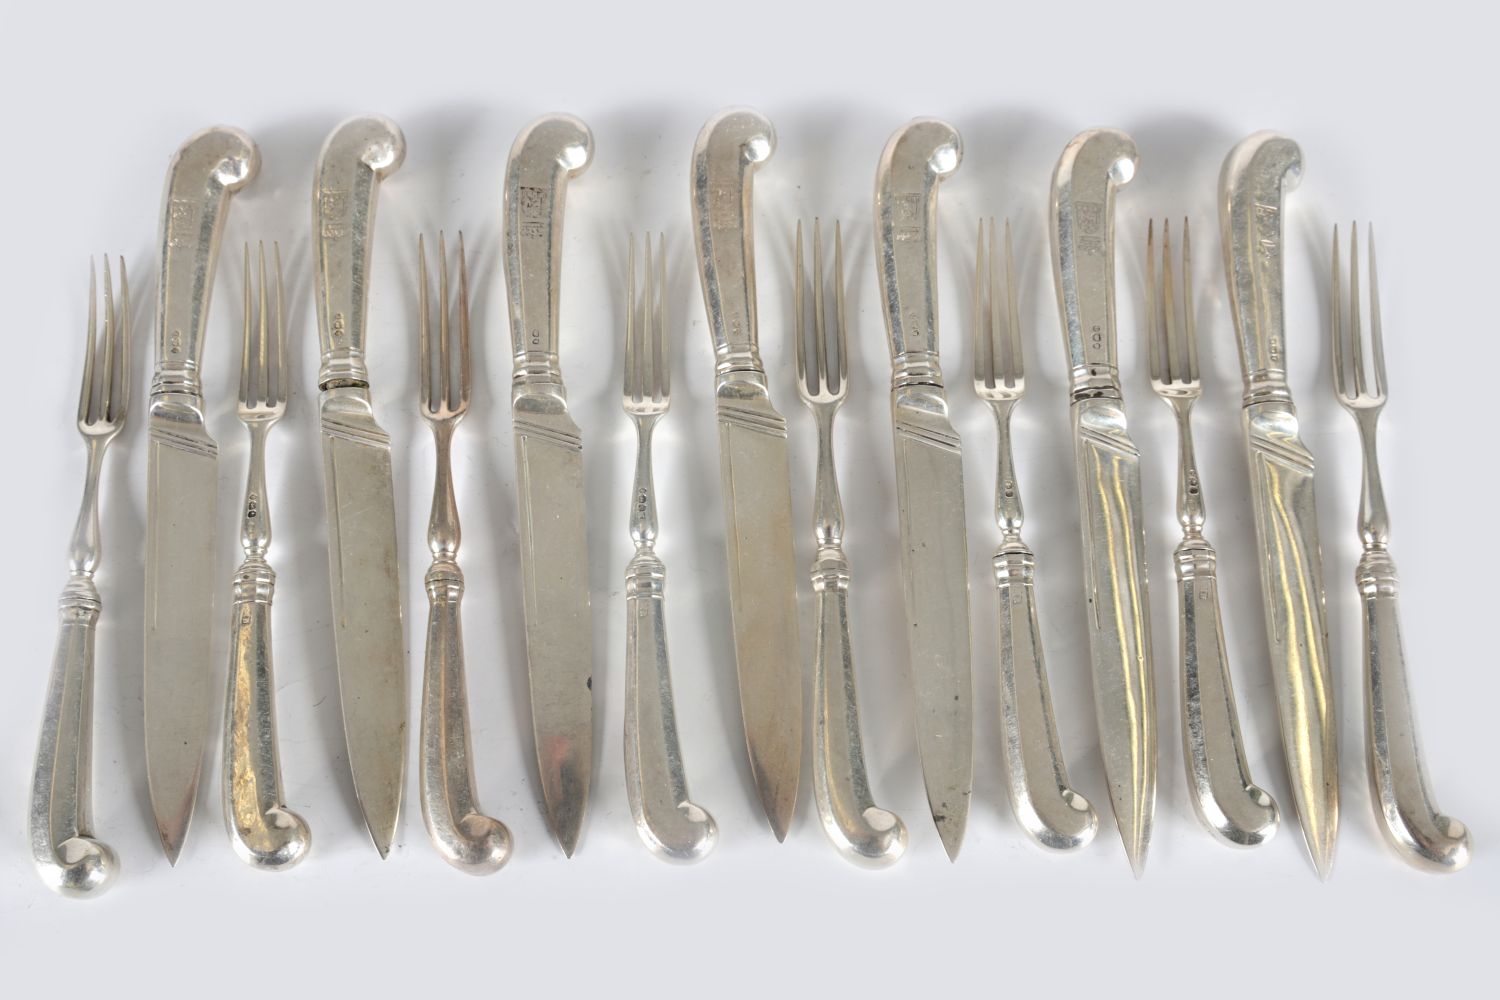 SET OF 15 SILVER FRUIT KNIVES AND FORKS